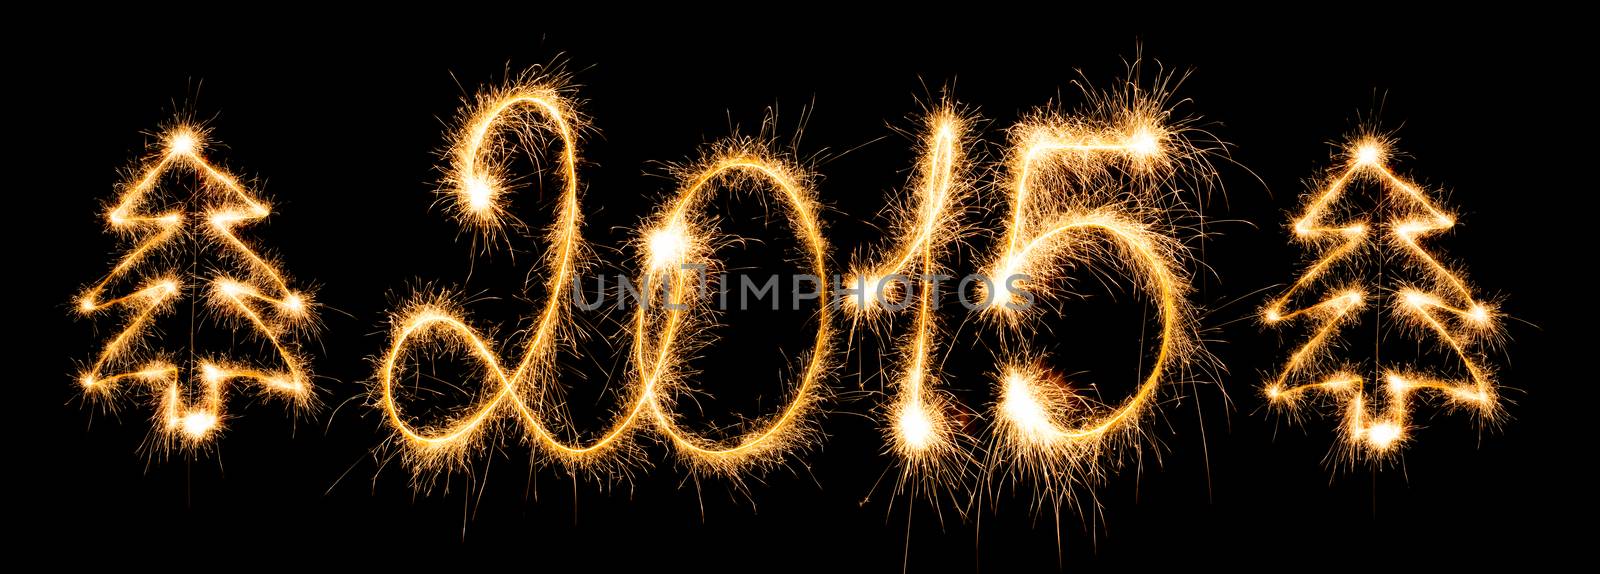 Happy New Year - 2015 made sparklers